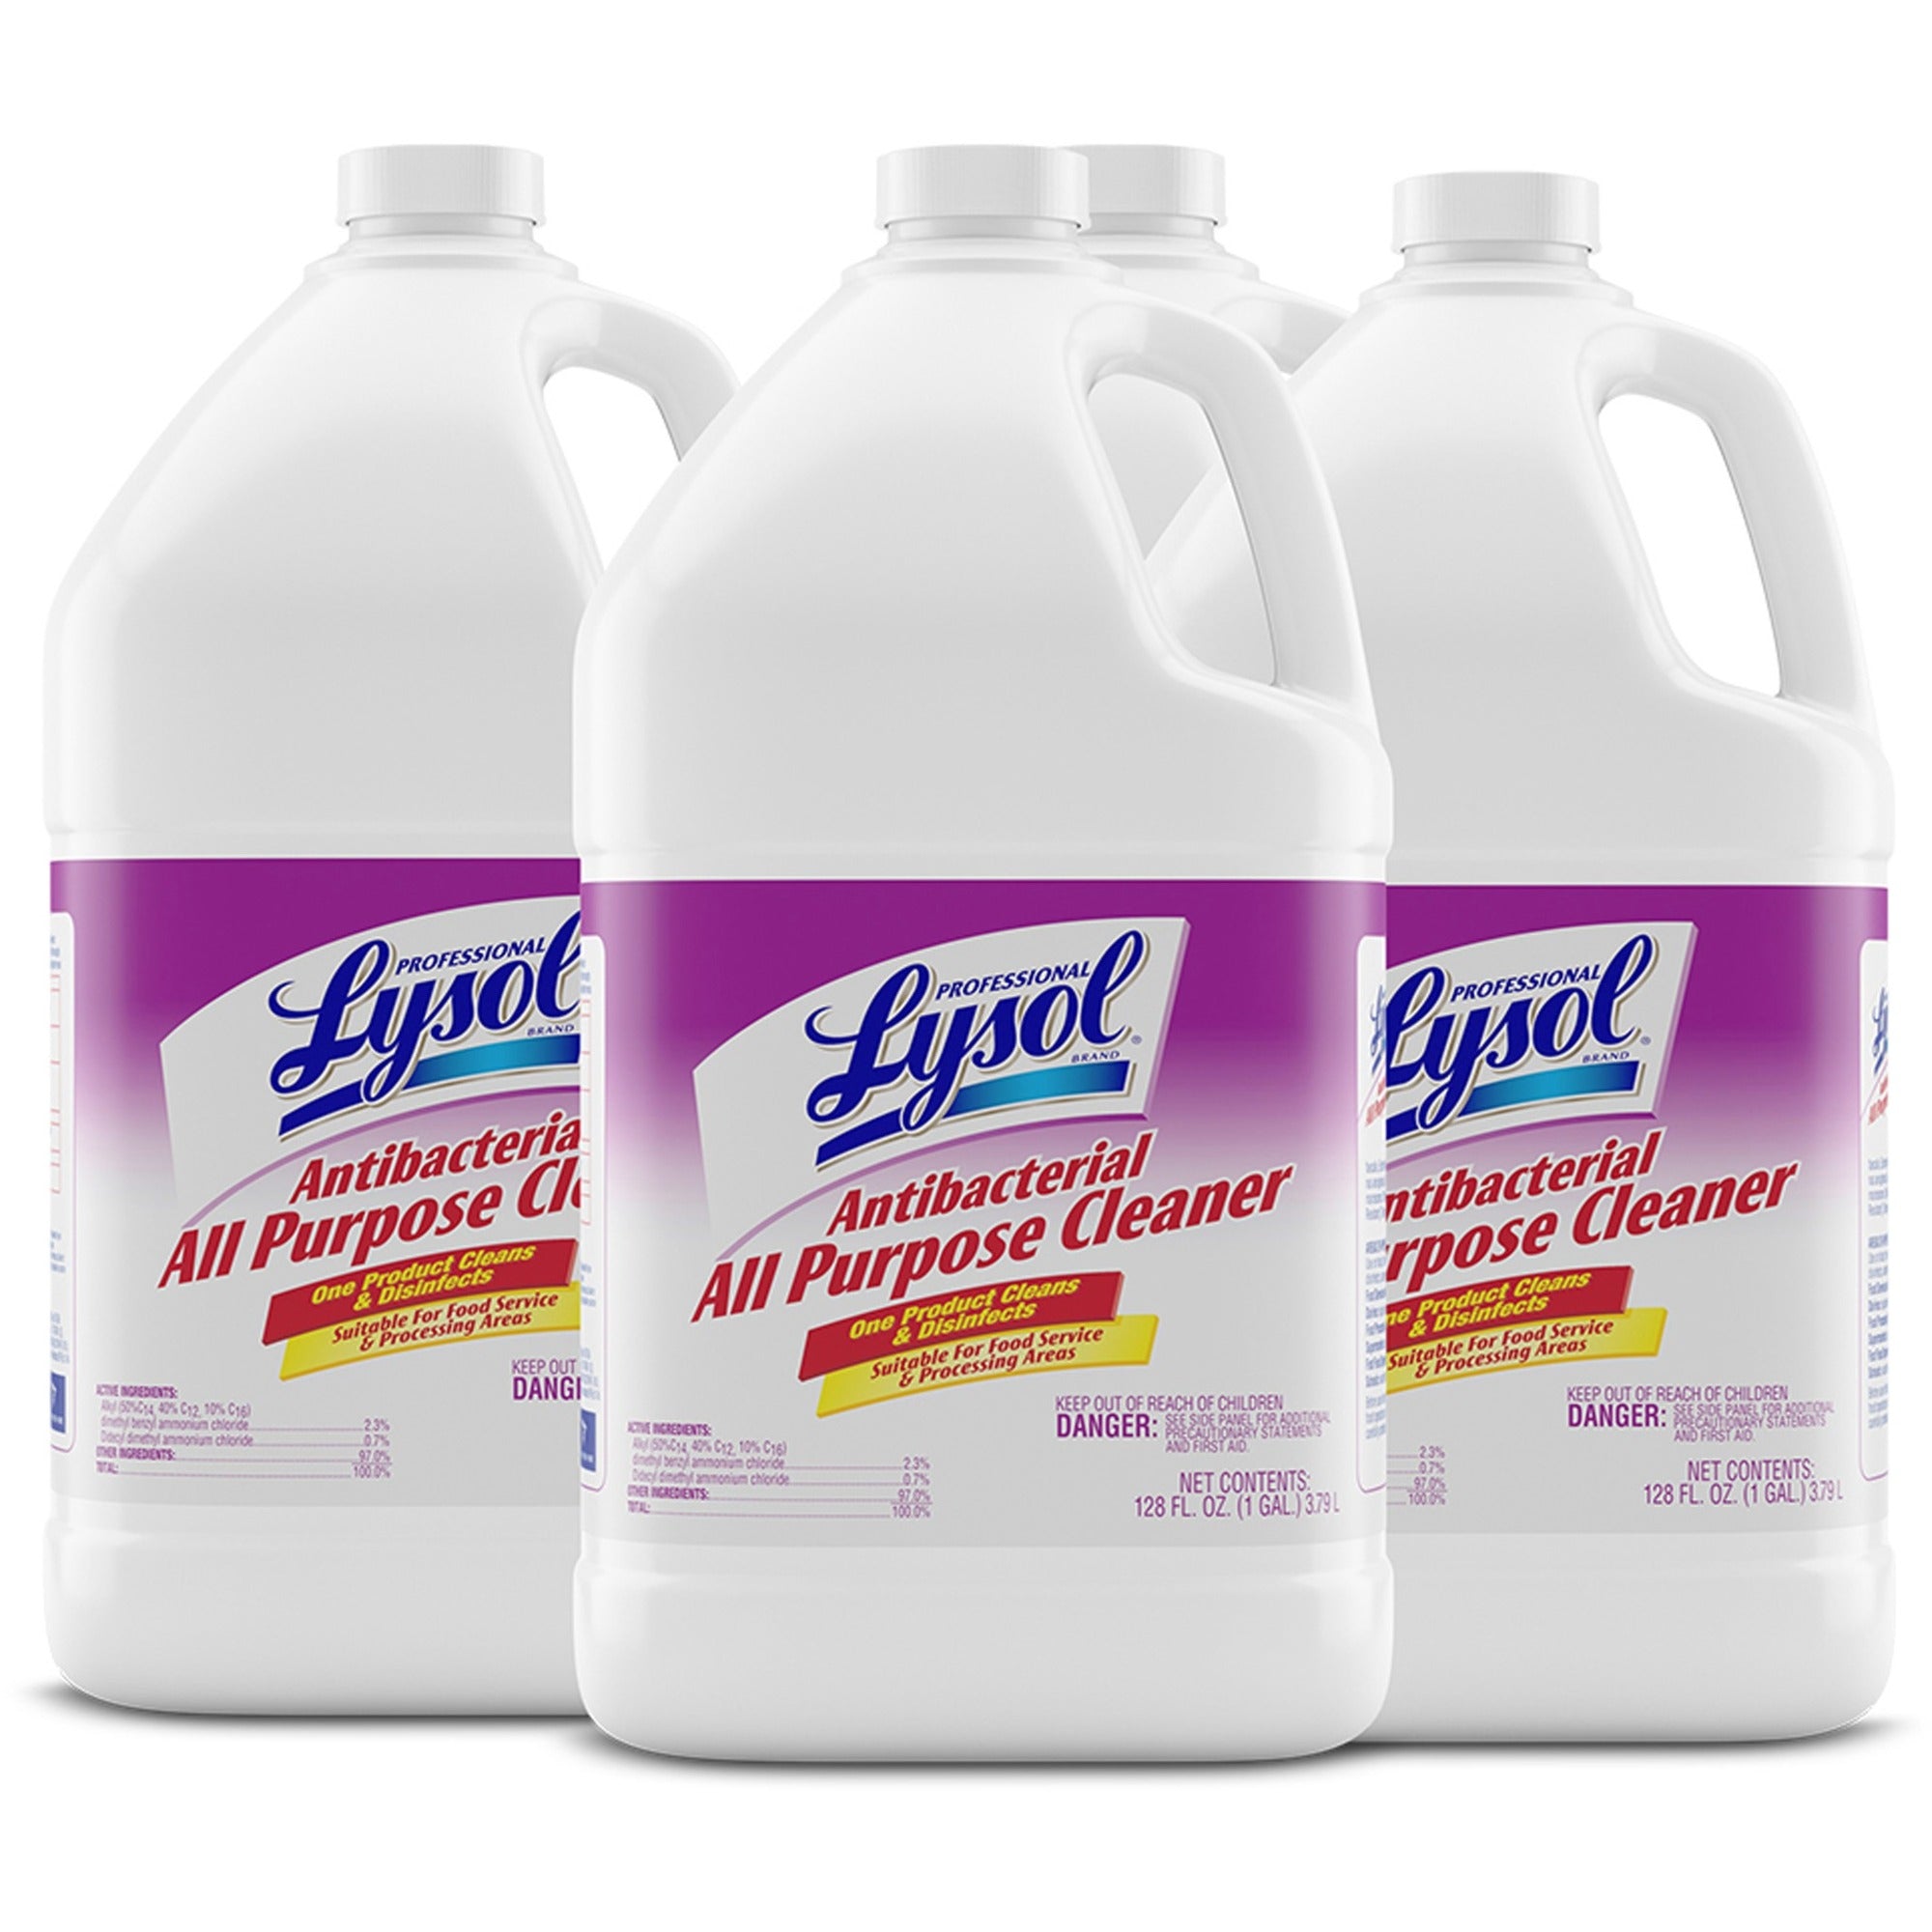 professional-lysol-antibacterial-all-purpose-cleaner-concentrate-128-fl-oz-4-quart-4-carton-heavy-duty-anti-bacterial-disinfectant-clear-fluorescent-green_rac74392ct - 1